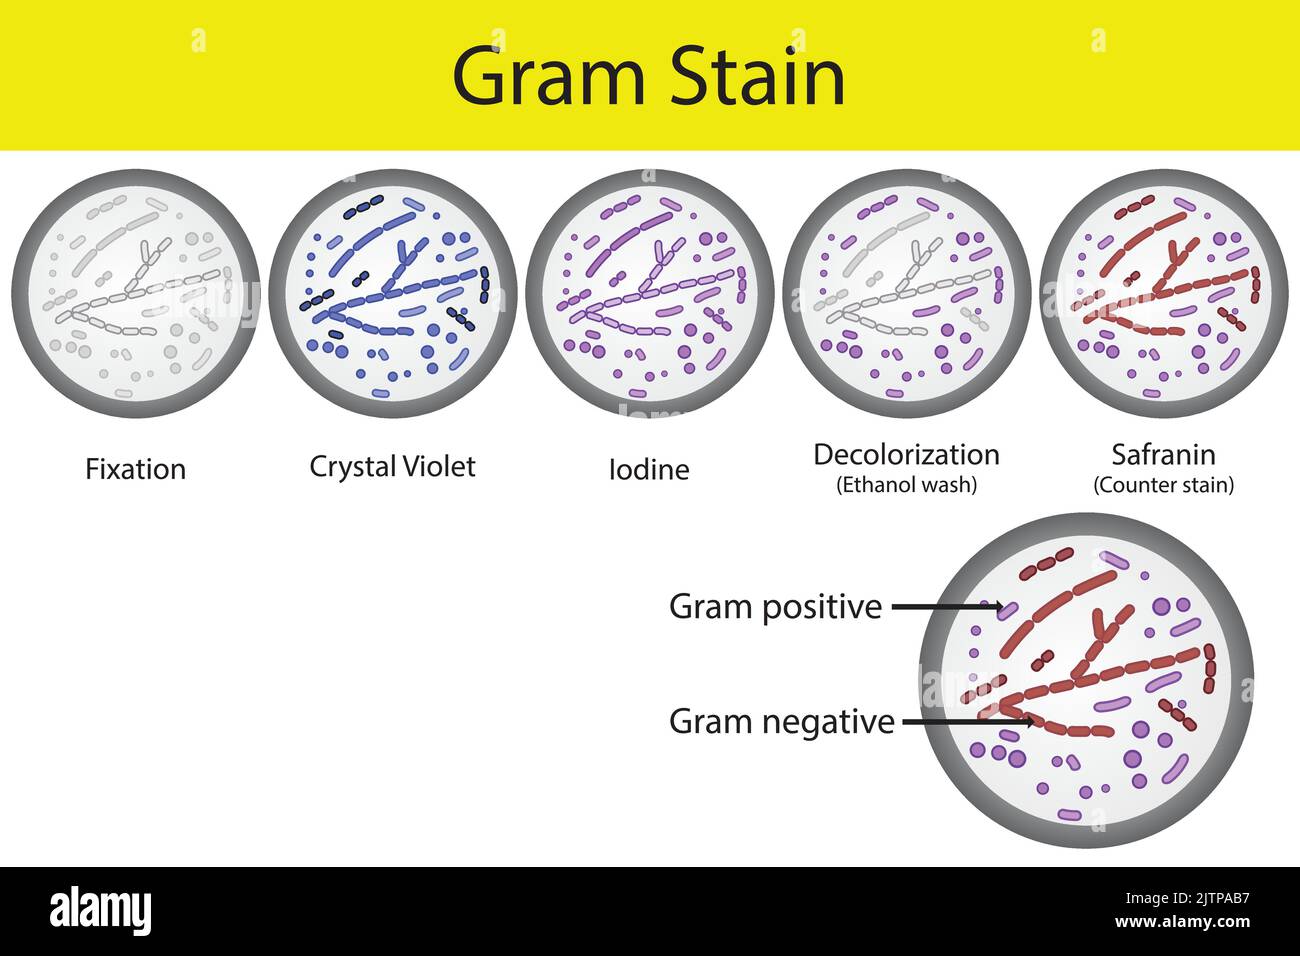 Diagram showing gram staining microbiology lab technique steps - microbiology laboratory using Crystal violet and Safranin Stock Vector